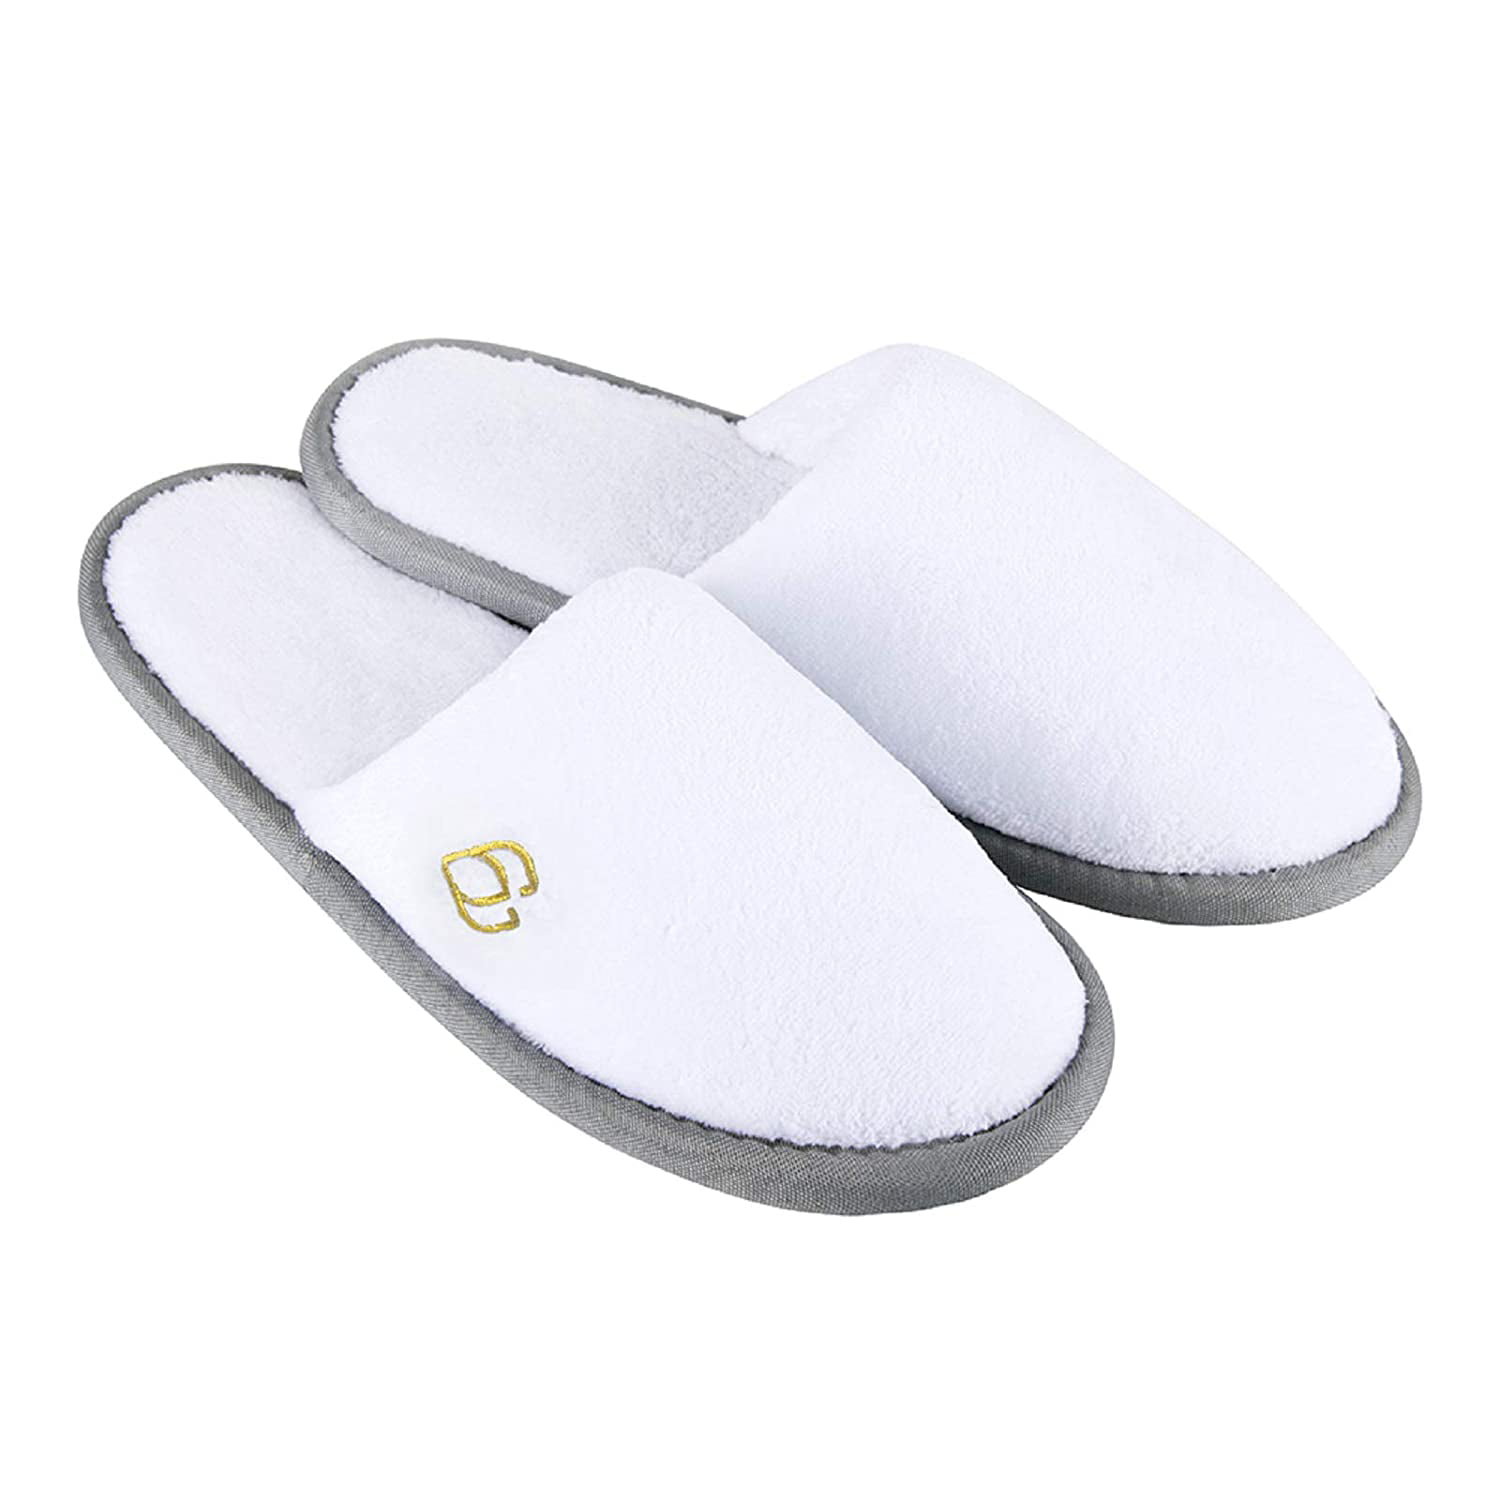 Piping Æsel Fisker Spa Slippers, Closed Toe(Large Size,12 Pairs) Disposable Indoor Hotel  Slippers, Fluffy Coral Fleece, Padded Sole for Comfort- for Guests, Hotel,  Travel, Fits Up to US Men Size 12 & Women Size 13 -